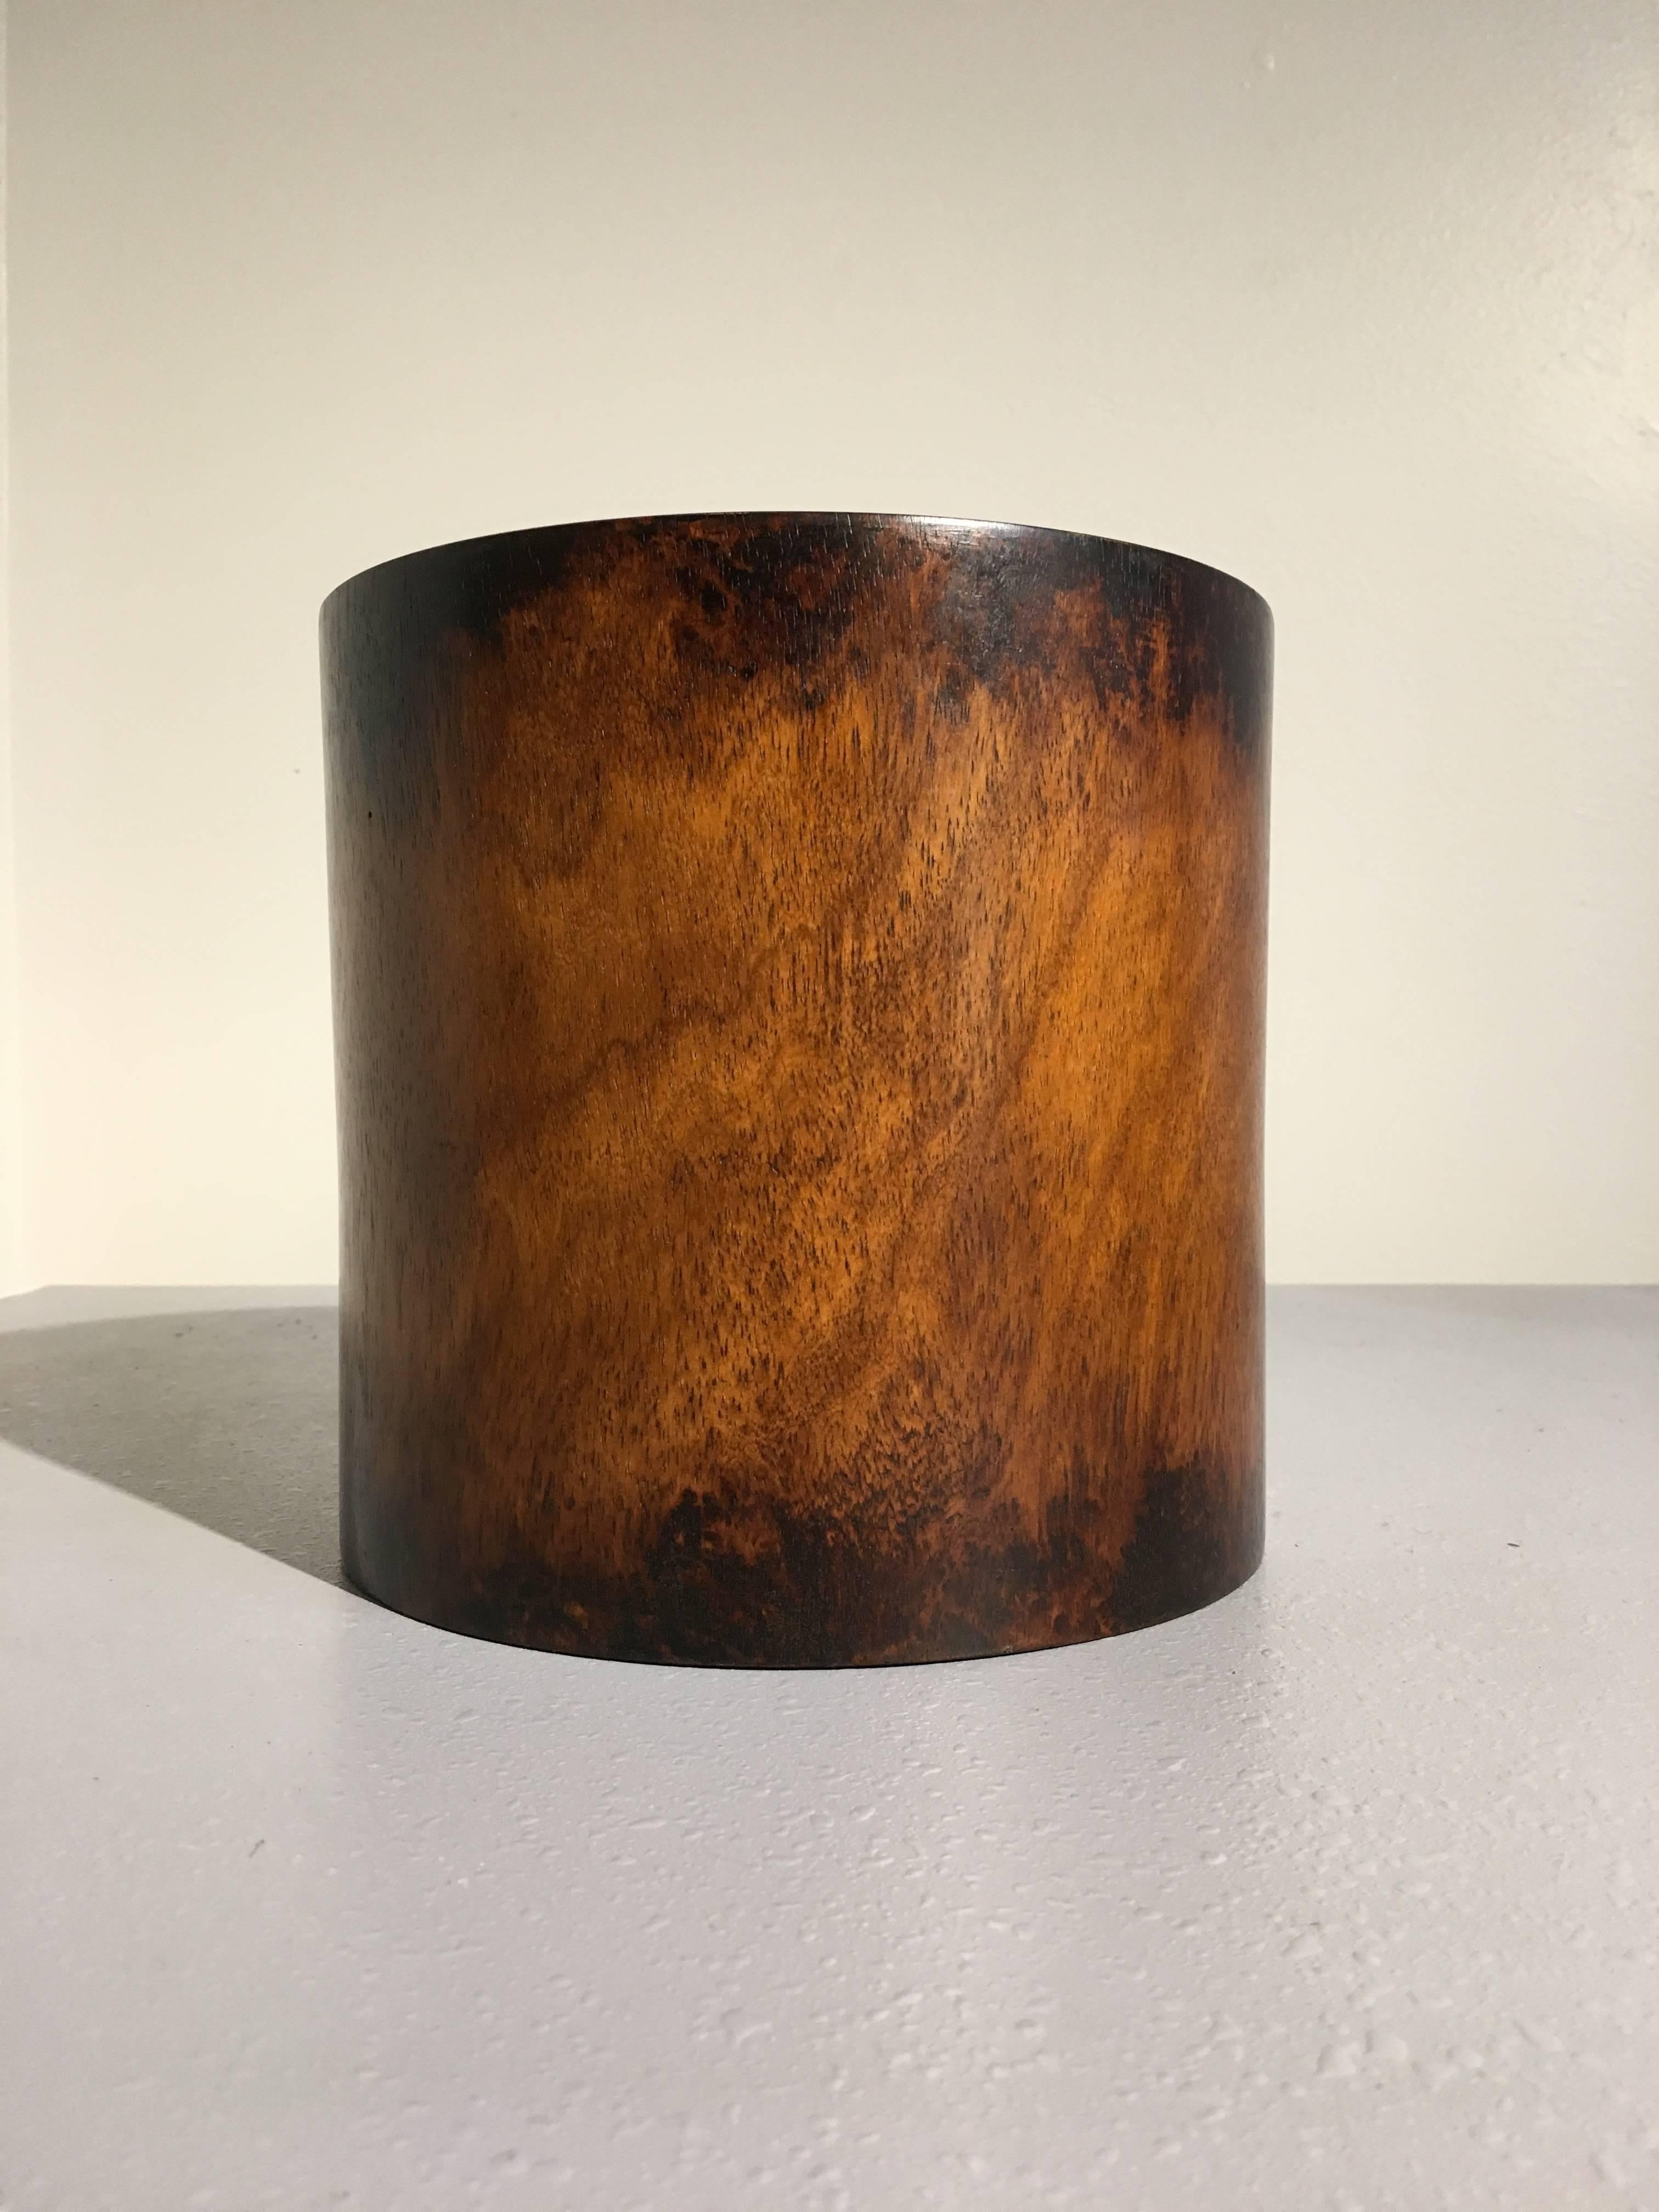 A large 19th century Qing dynasty huanghulai brush pot. 
Of simple cylindrical form. The wood displaying a lovely patina of rich honey brown, with an attractive, muted grain, reminiscent of landscapes. 
Used by scholars to hold their paint and